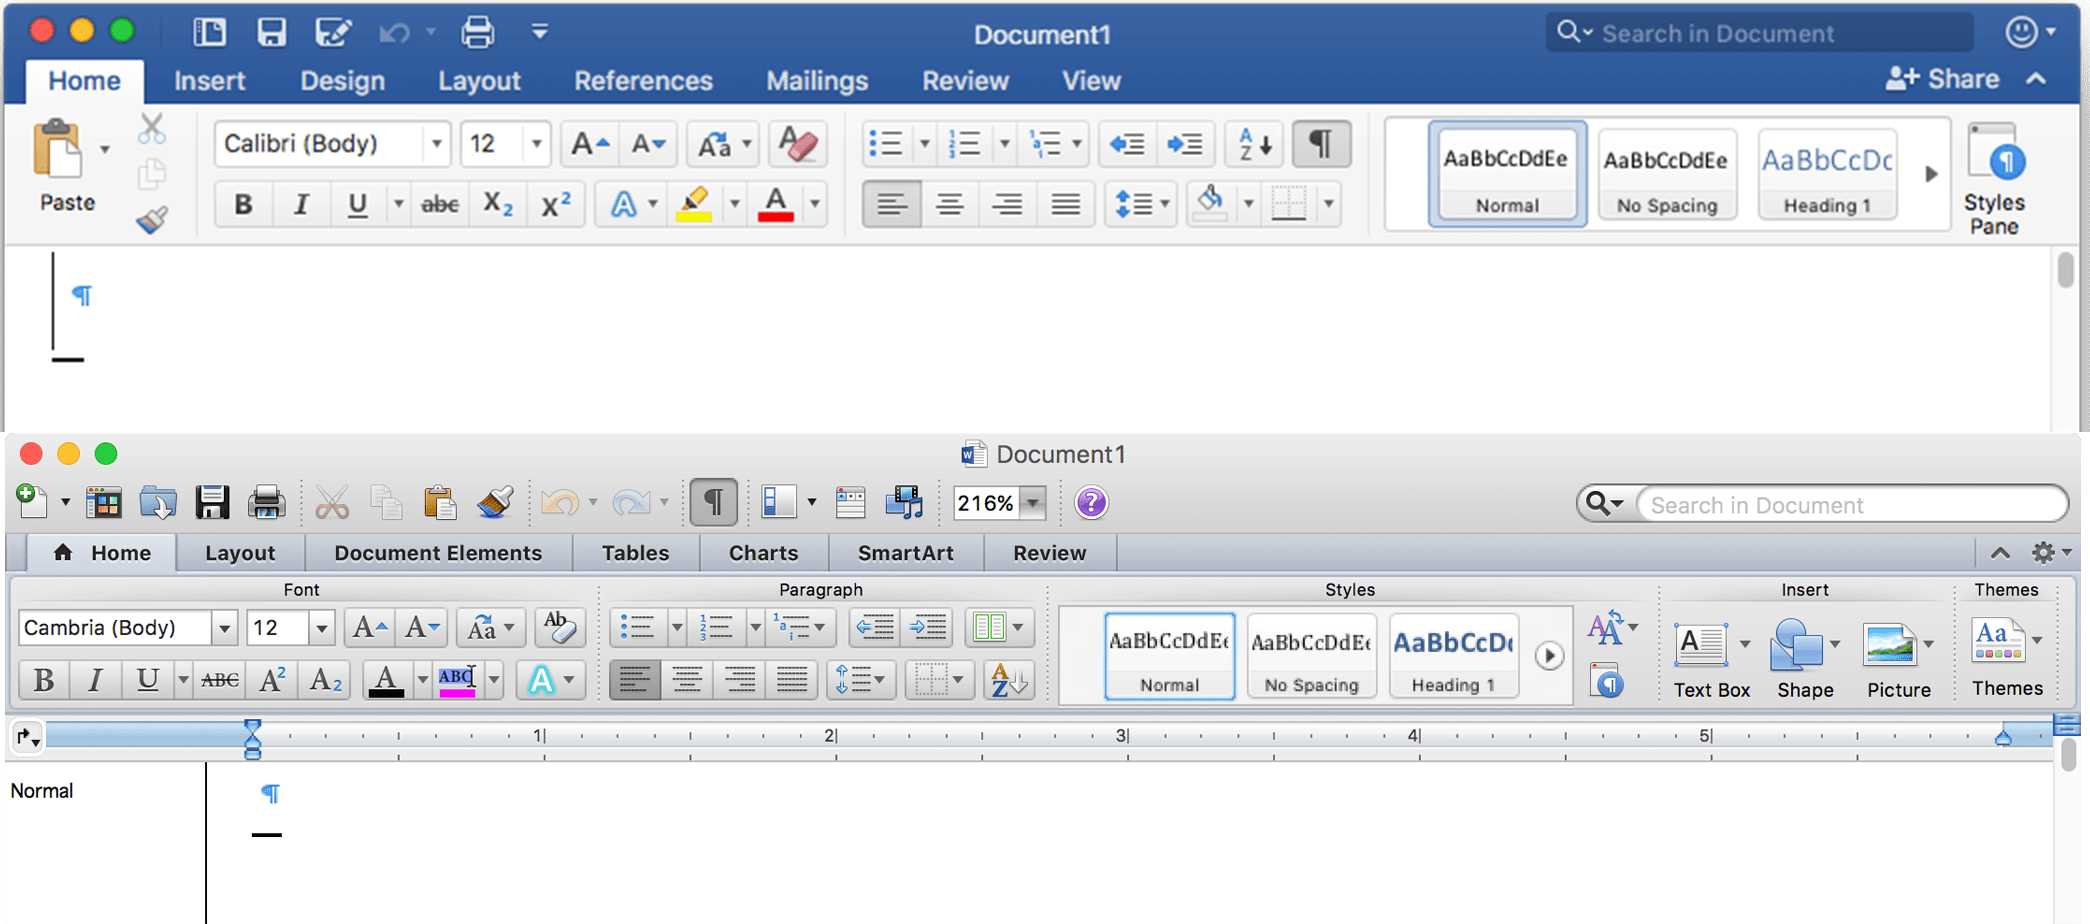 Word Cannot Open This Document Template Mendeley – Tenomy In Word Cannot Open This Document Template